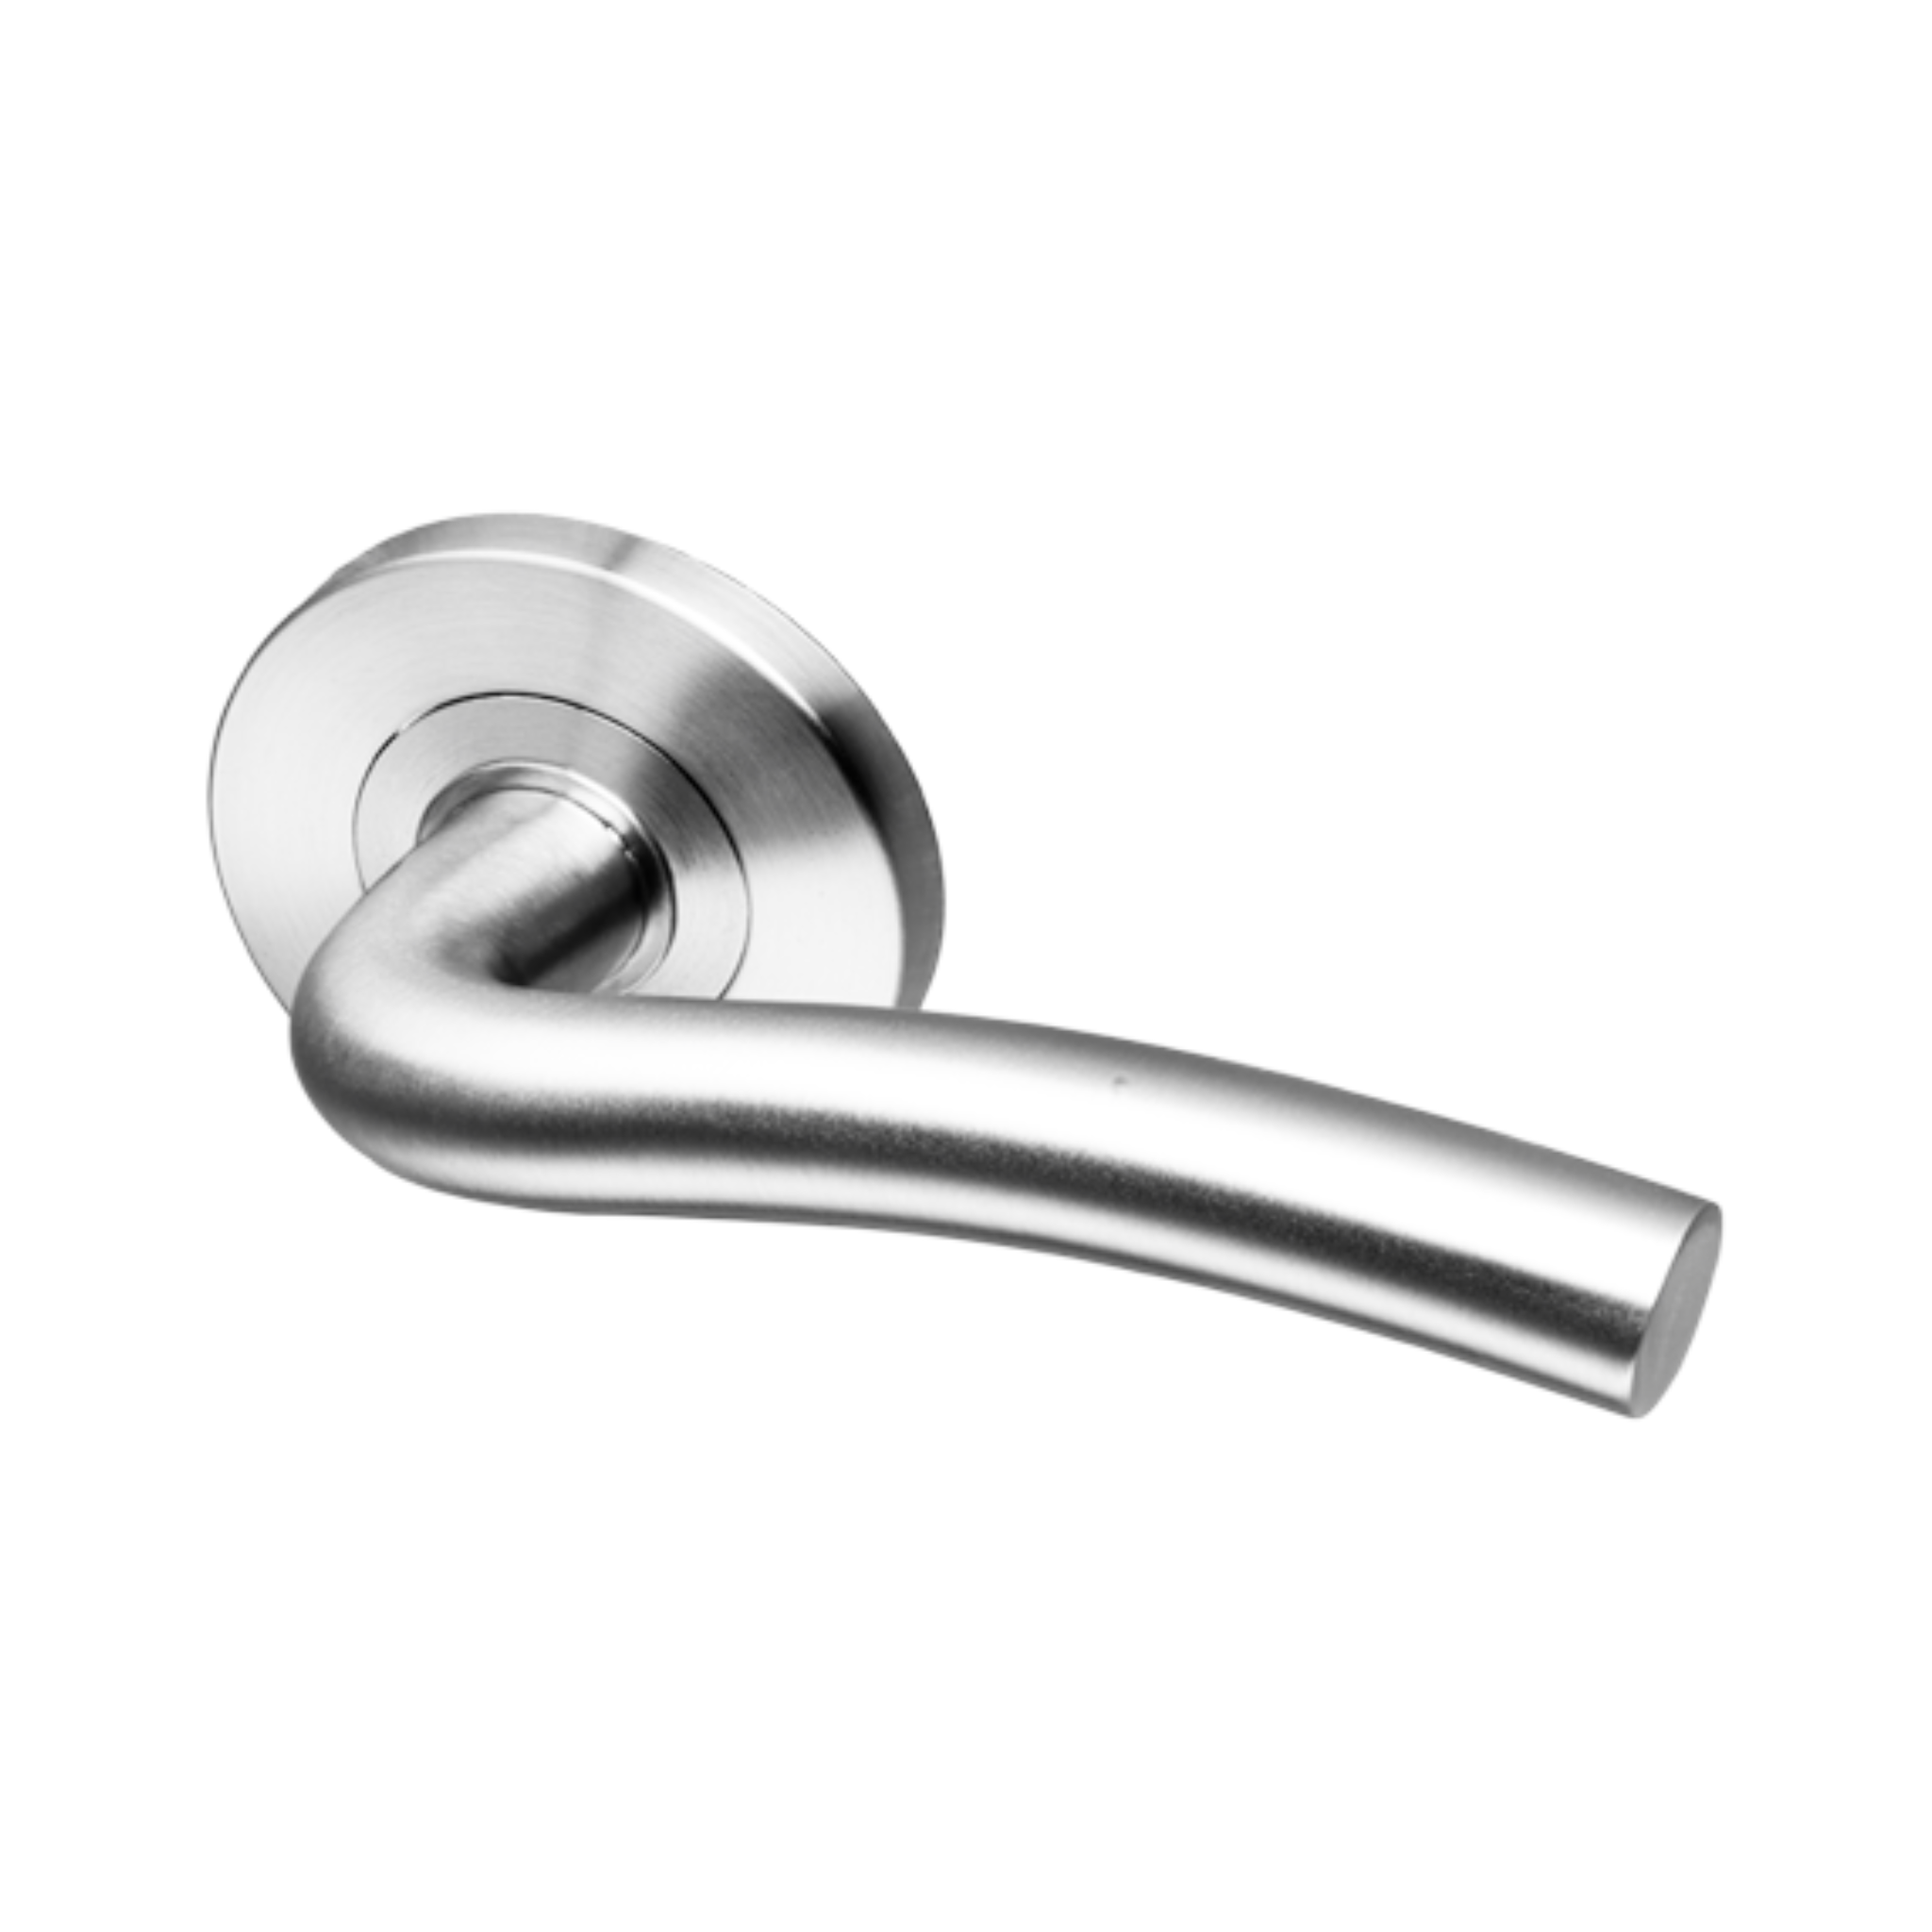 Coupé Inari -Rose, Lever Handles, Tubular, Round Rose, With Escutcheons, Stainless Steel, QS